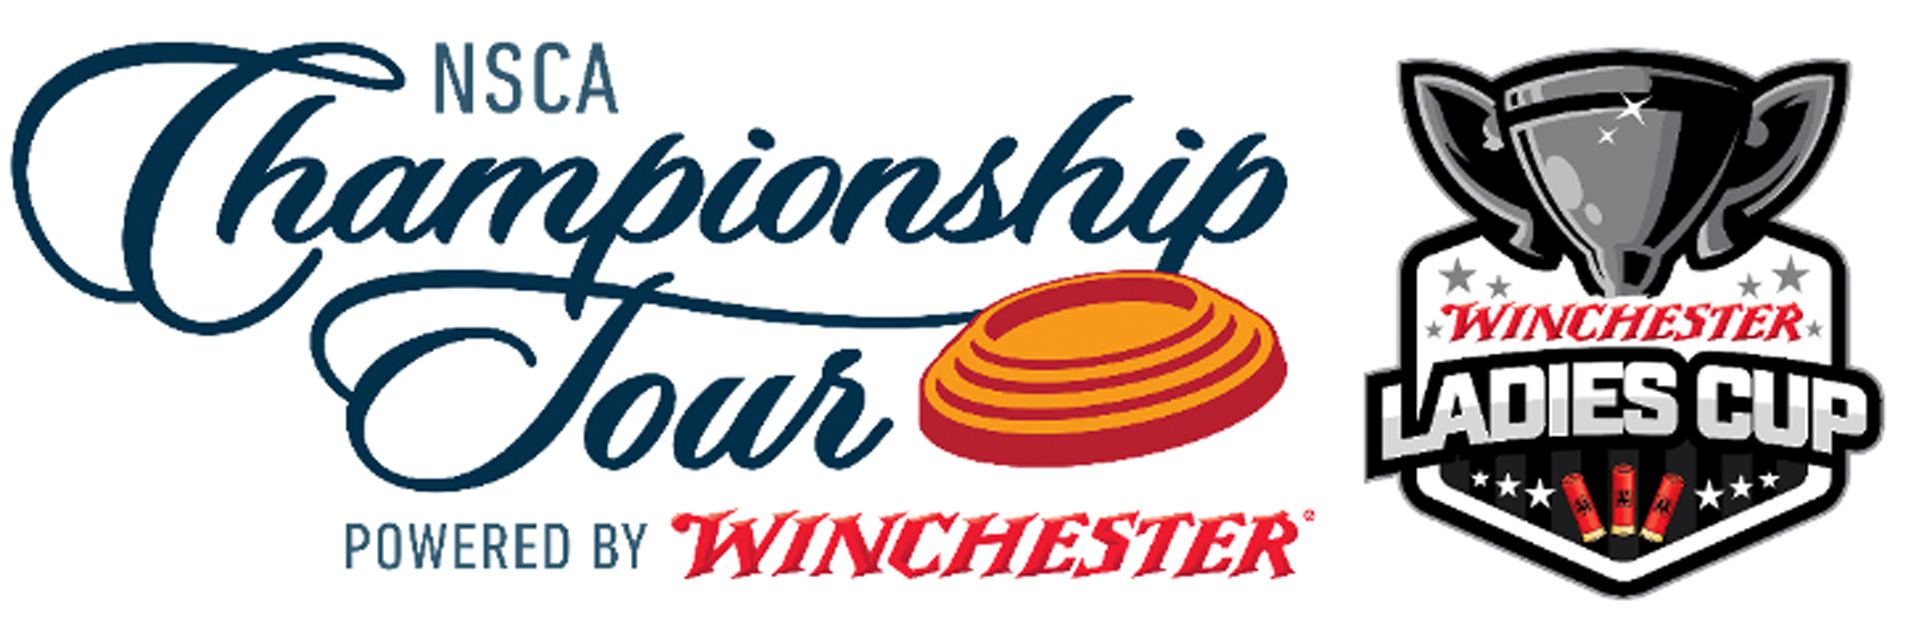 NSCA Championship Tour and Winchester Ladies Cup